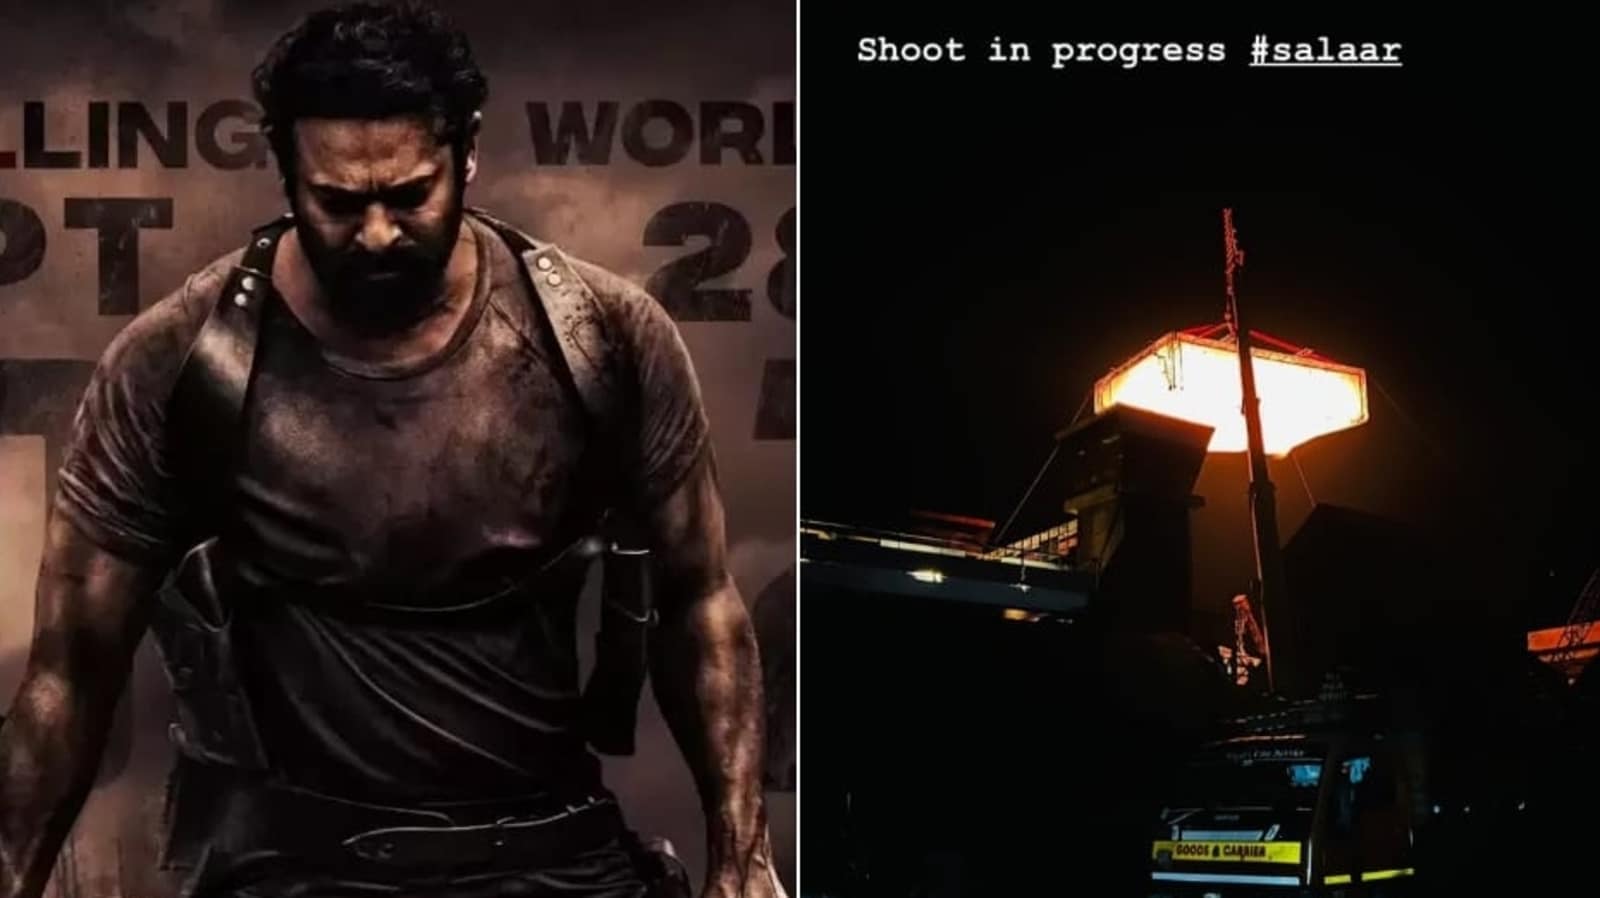 Fans want update on Prabhas’ Salaar teaser after cinematographer shares BTS glimpse from set. See pic